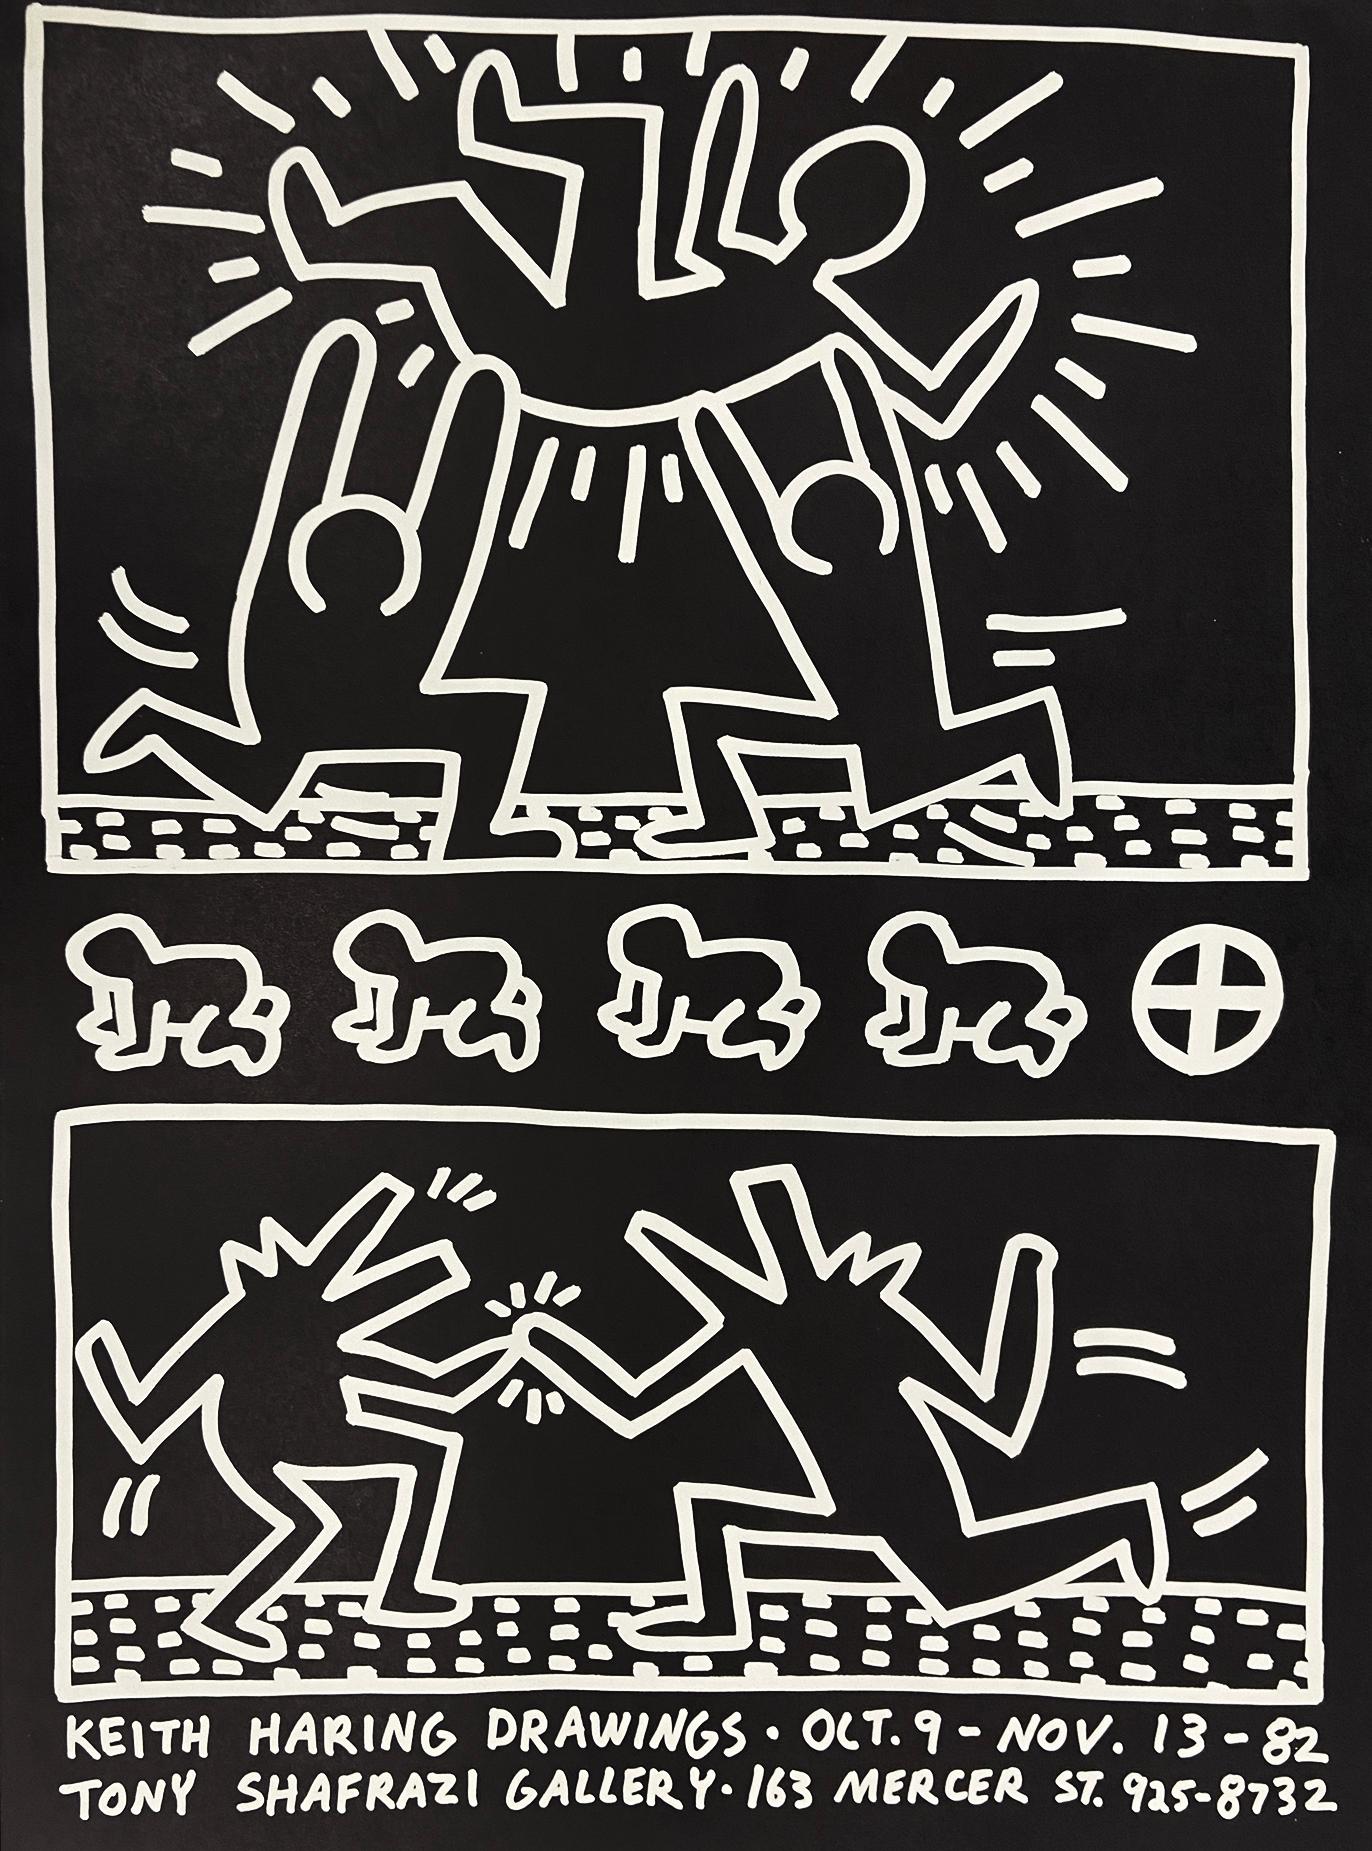 Keith Haring’s First Solo Gallery Exhibition:
Rare original Keith Haring exhibit poster for 'Keith Haring Drawings' Oct. 9 - Nov. 13 - 1982, at Tony Shafrazi Gallery, New York. An exquisite, sought after vintage Haring piece marking Keith's first